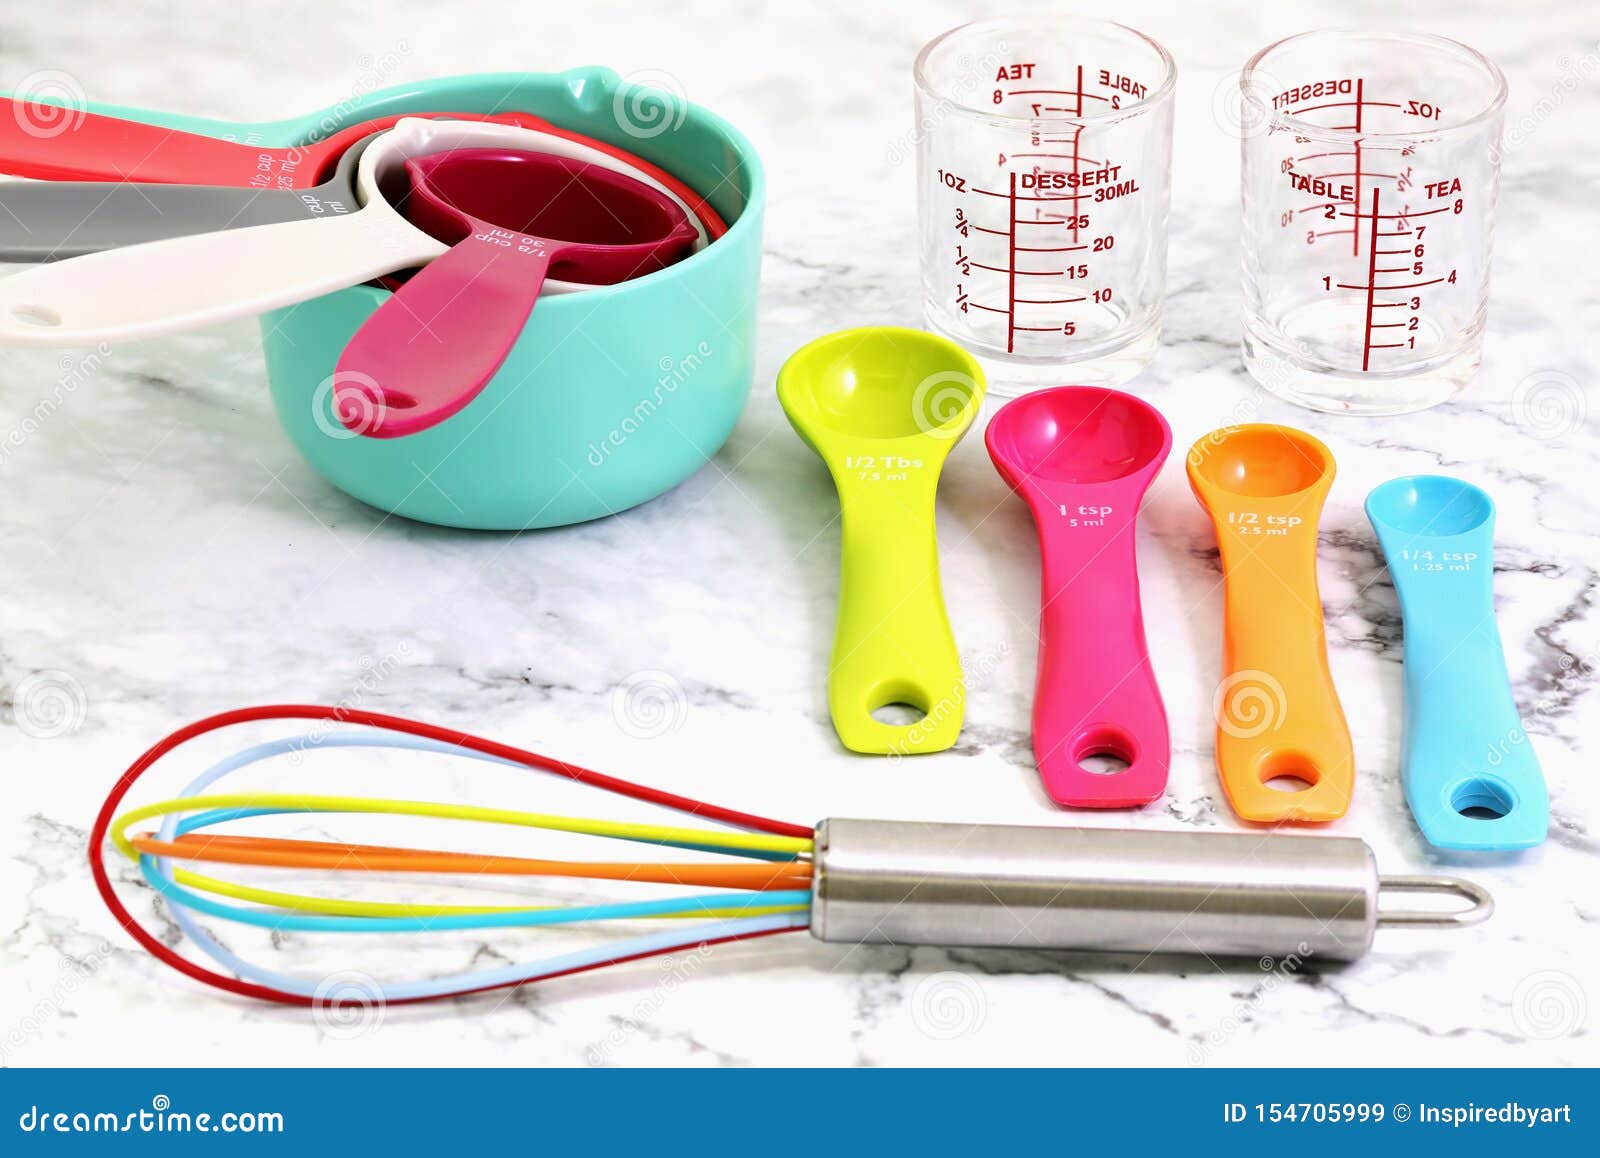 Measuring Cups - Whisk